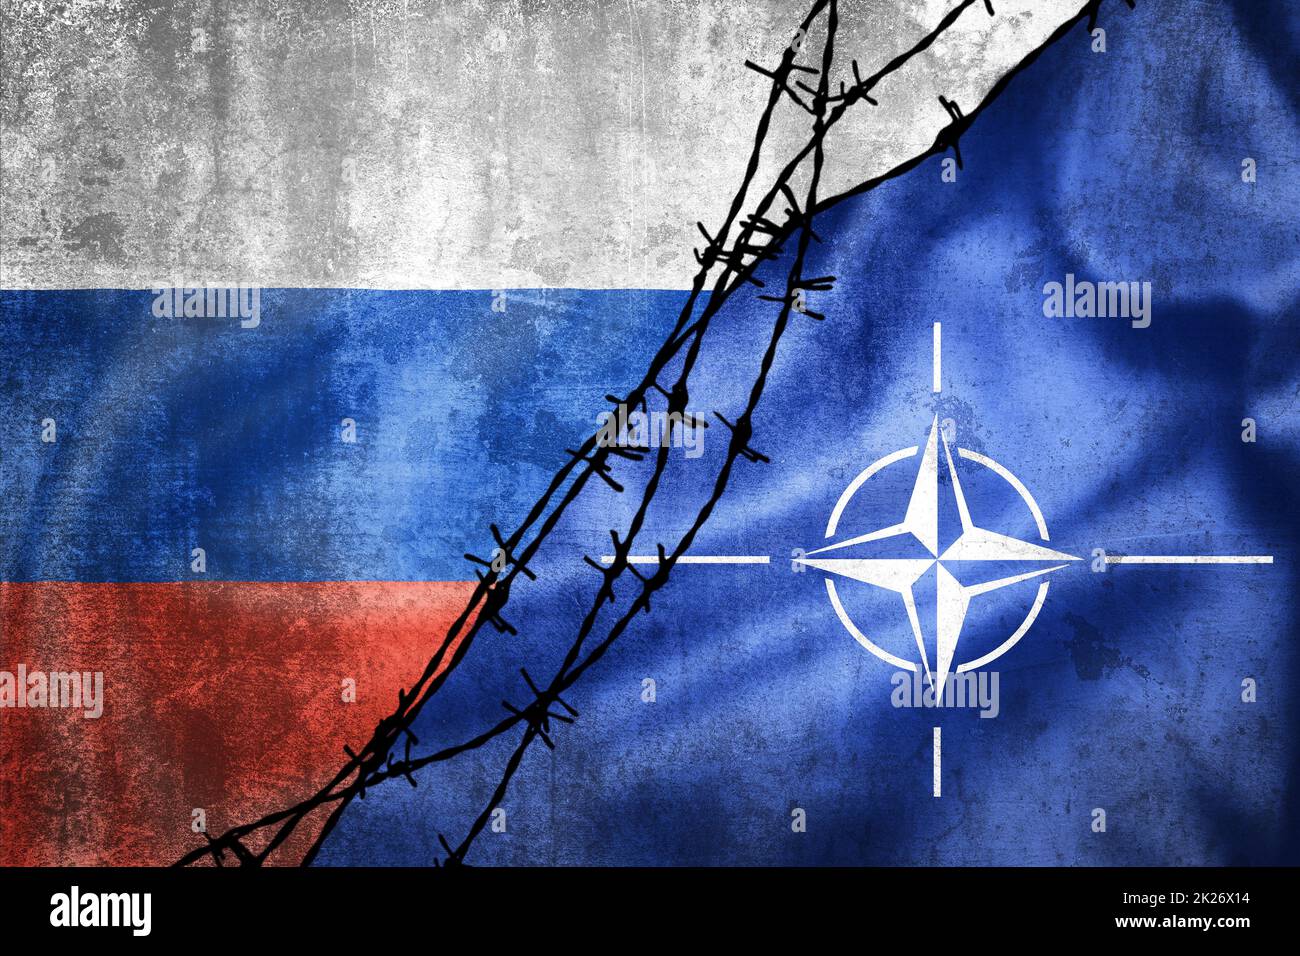 Grunge flags of Russian Federation and NATO divided by barb wire illustration Stock Photo